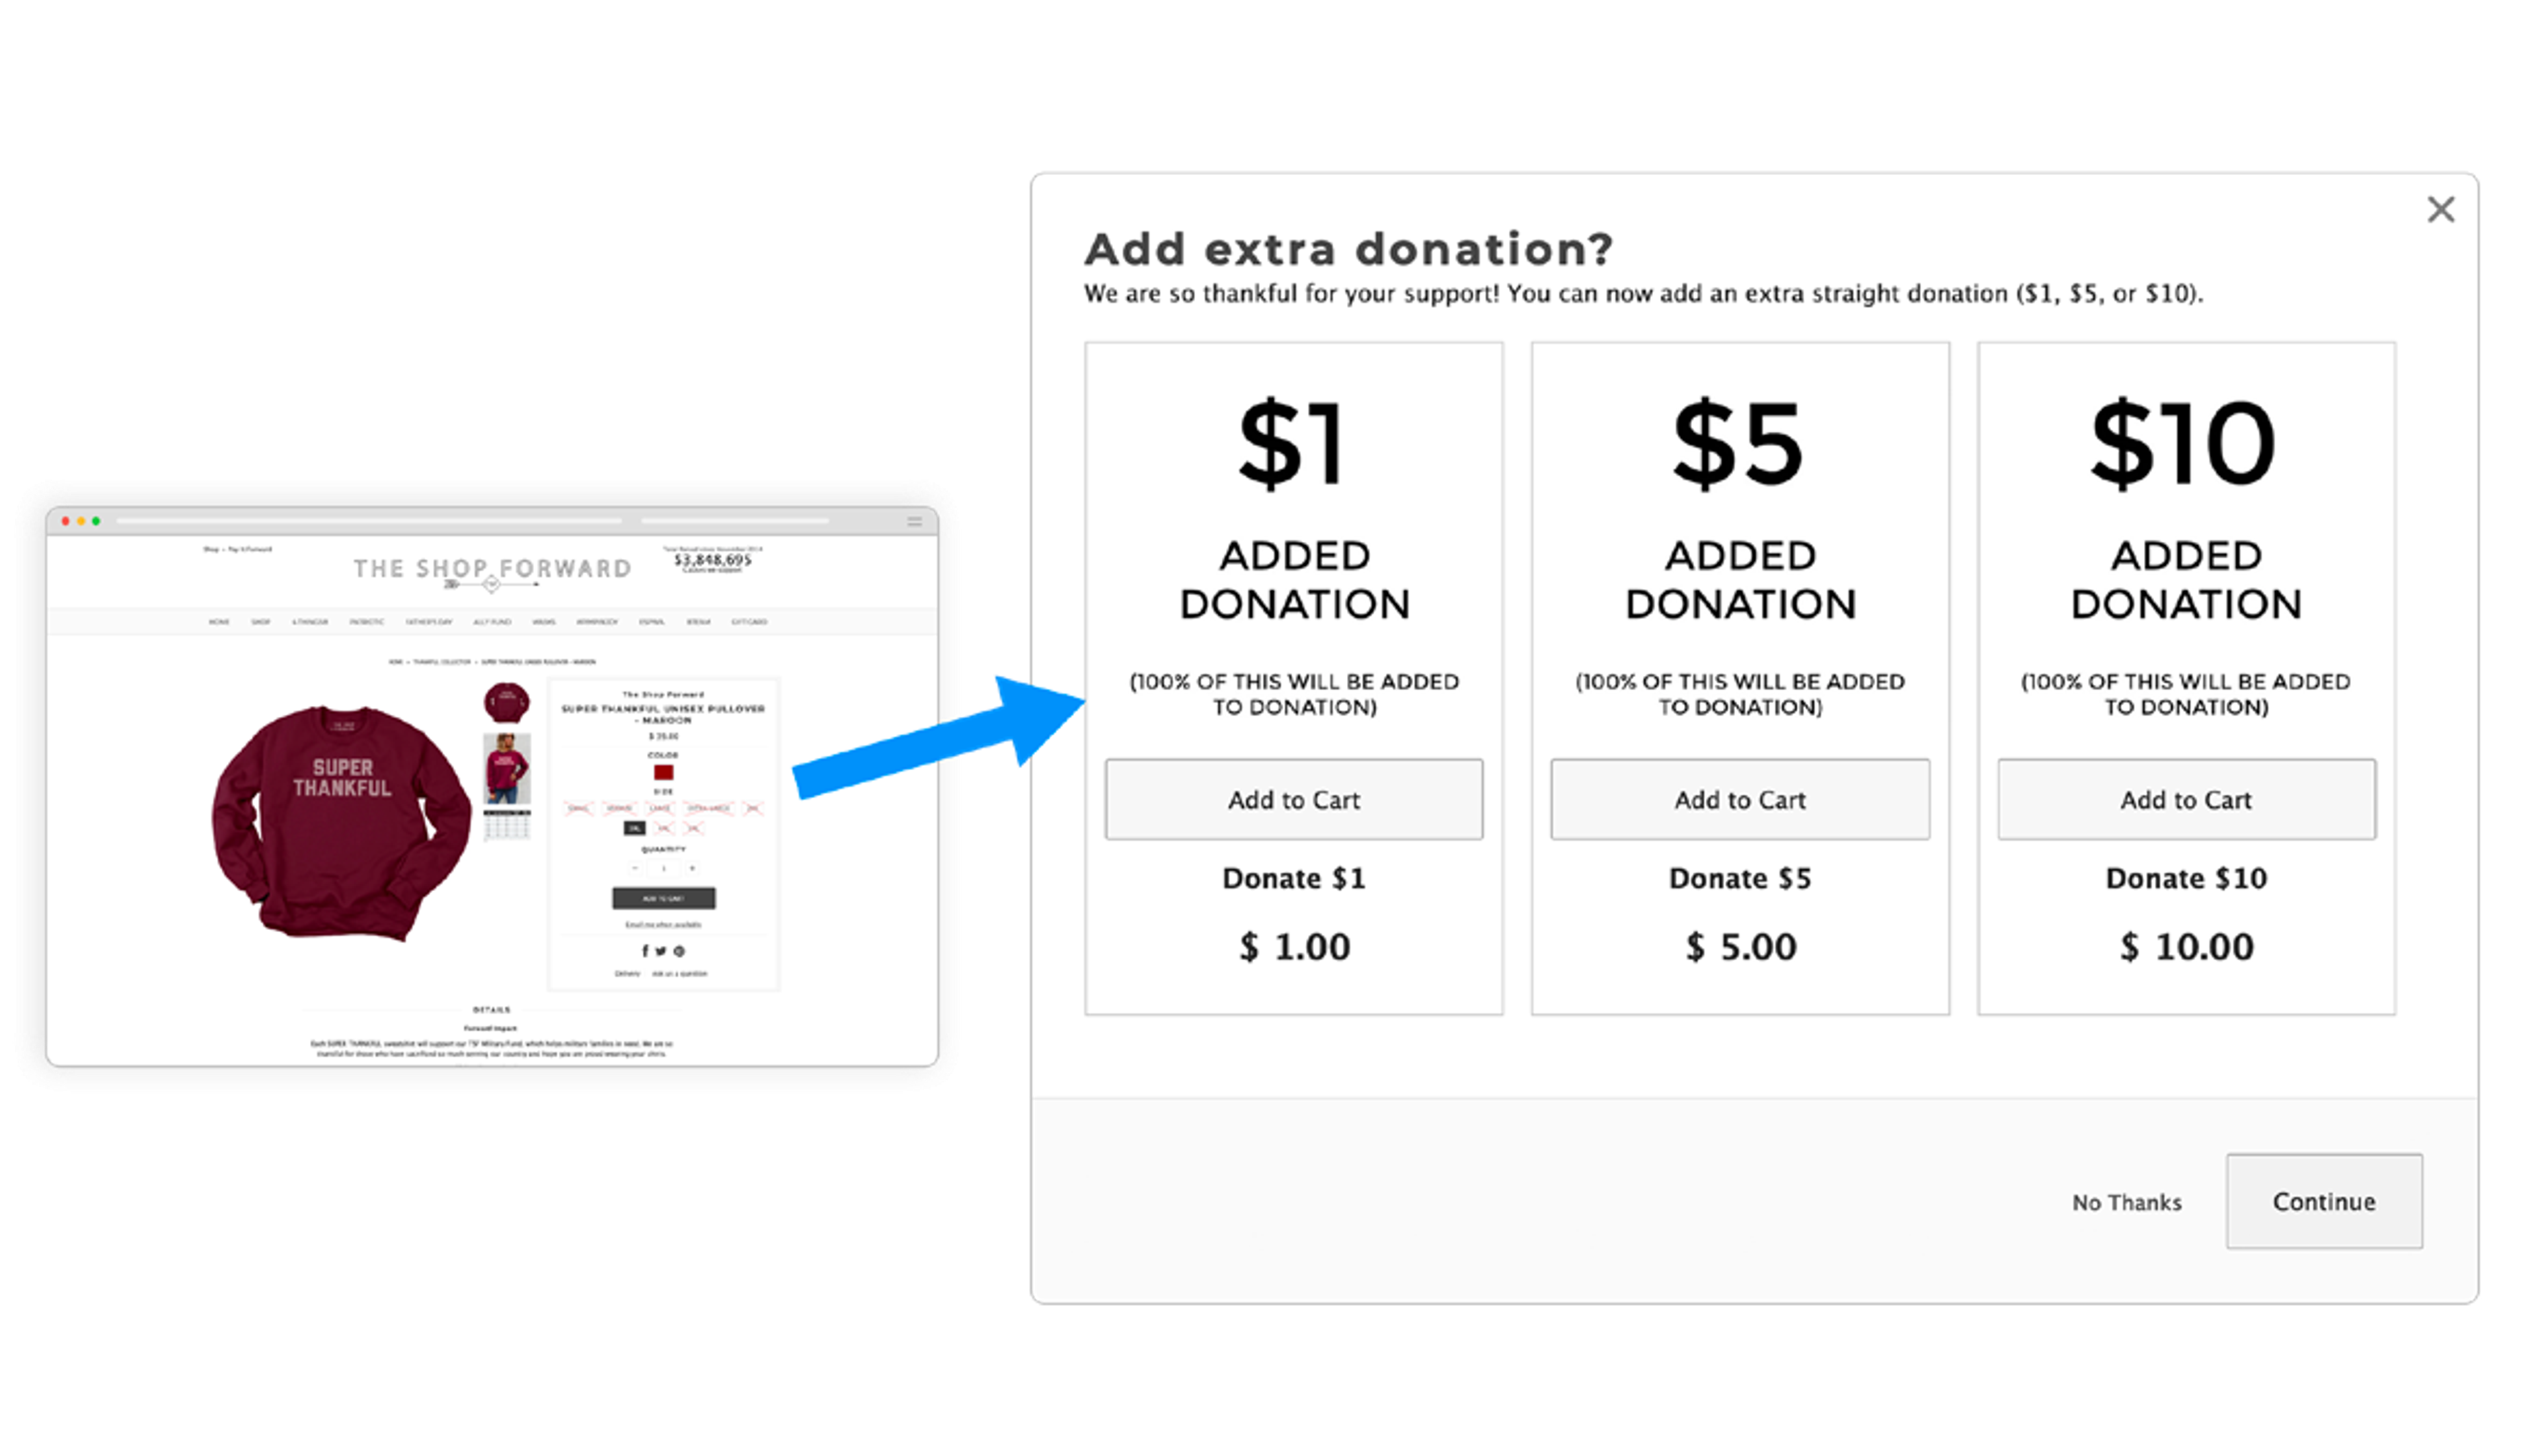 Donations as an upsell